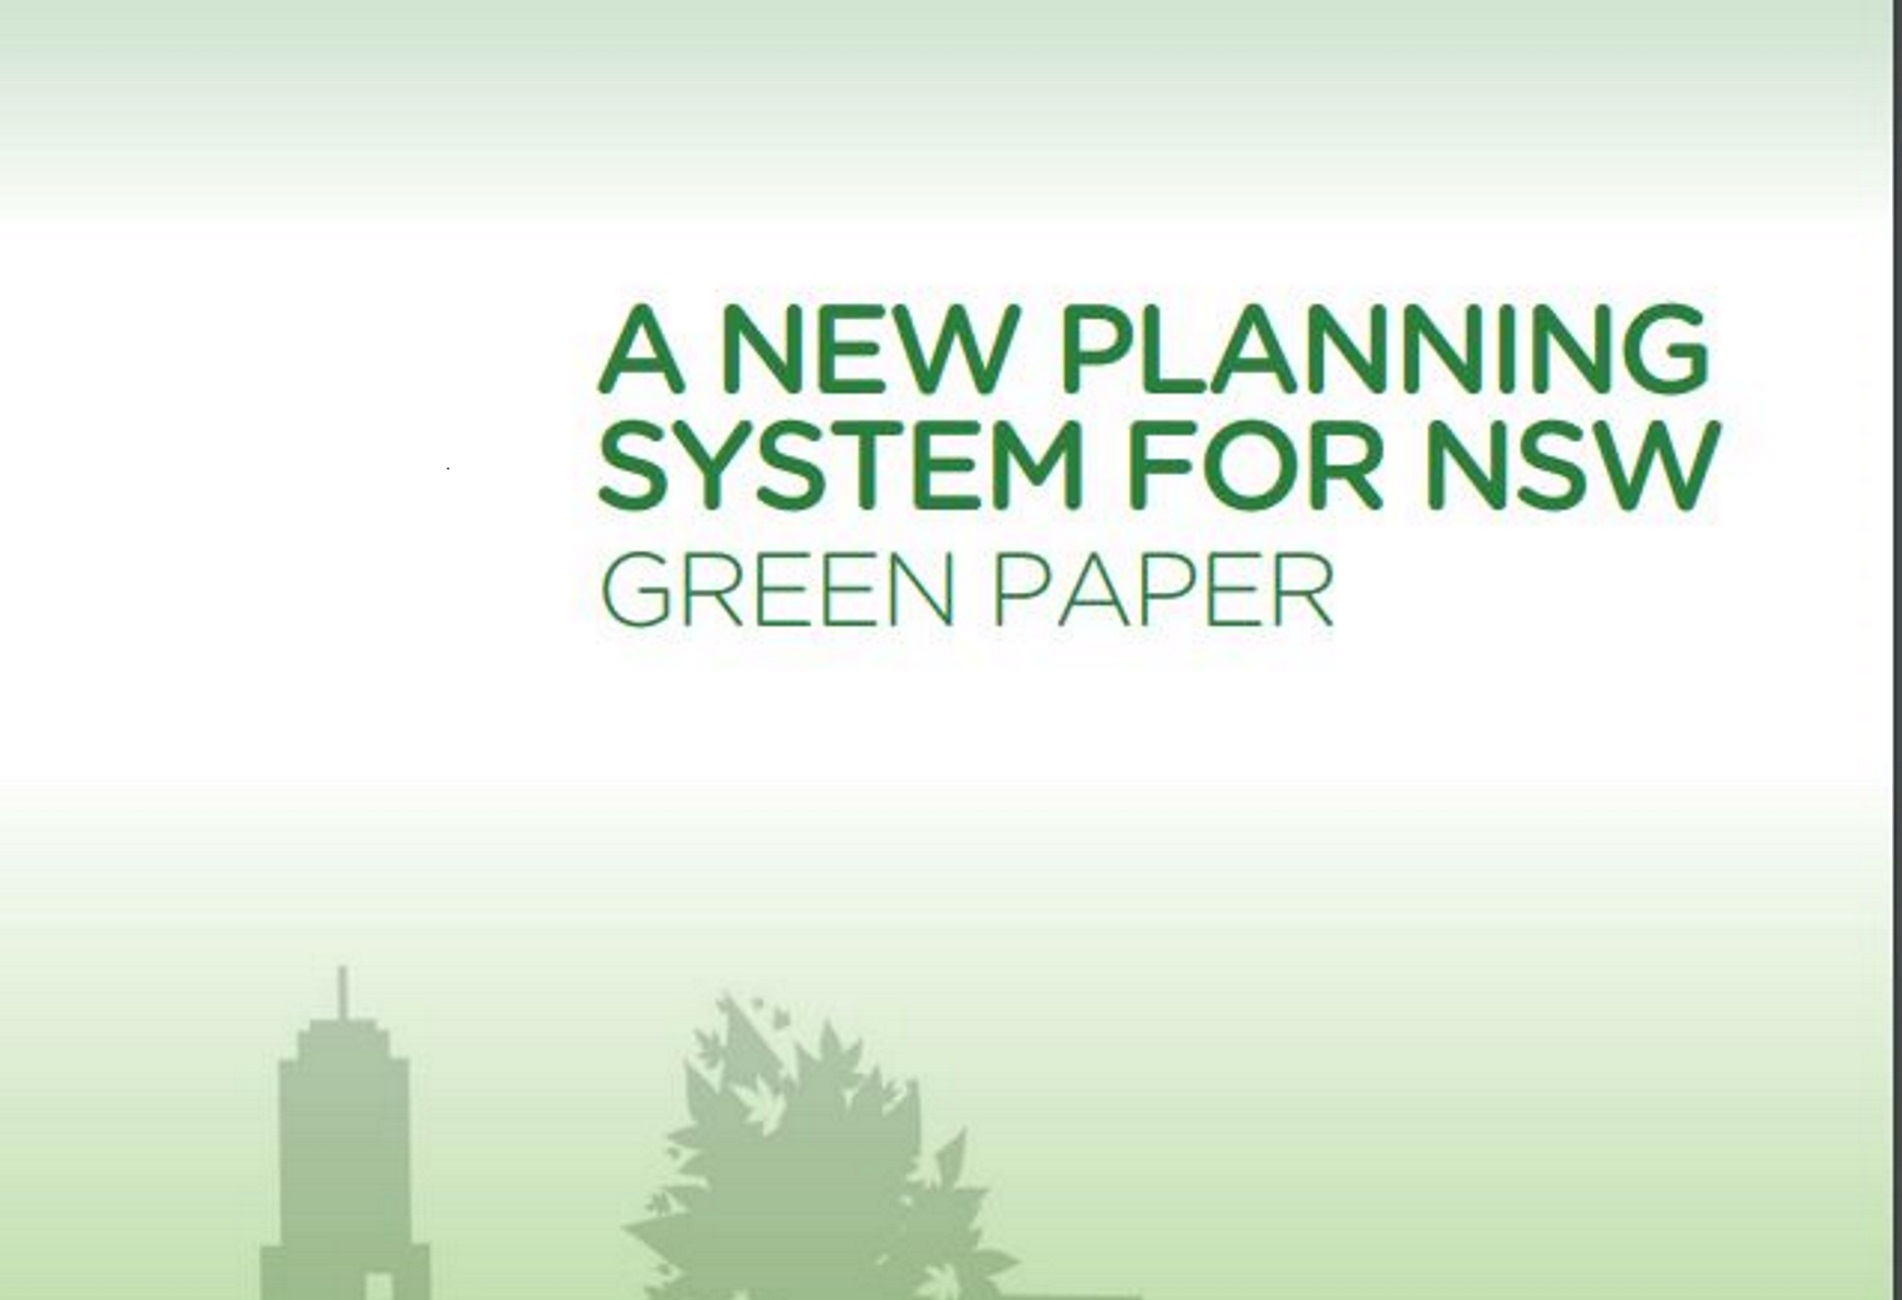 New Planning System for NSW Green Paper